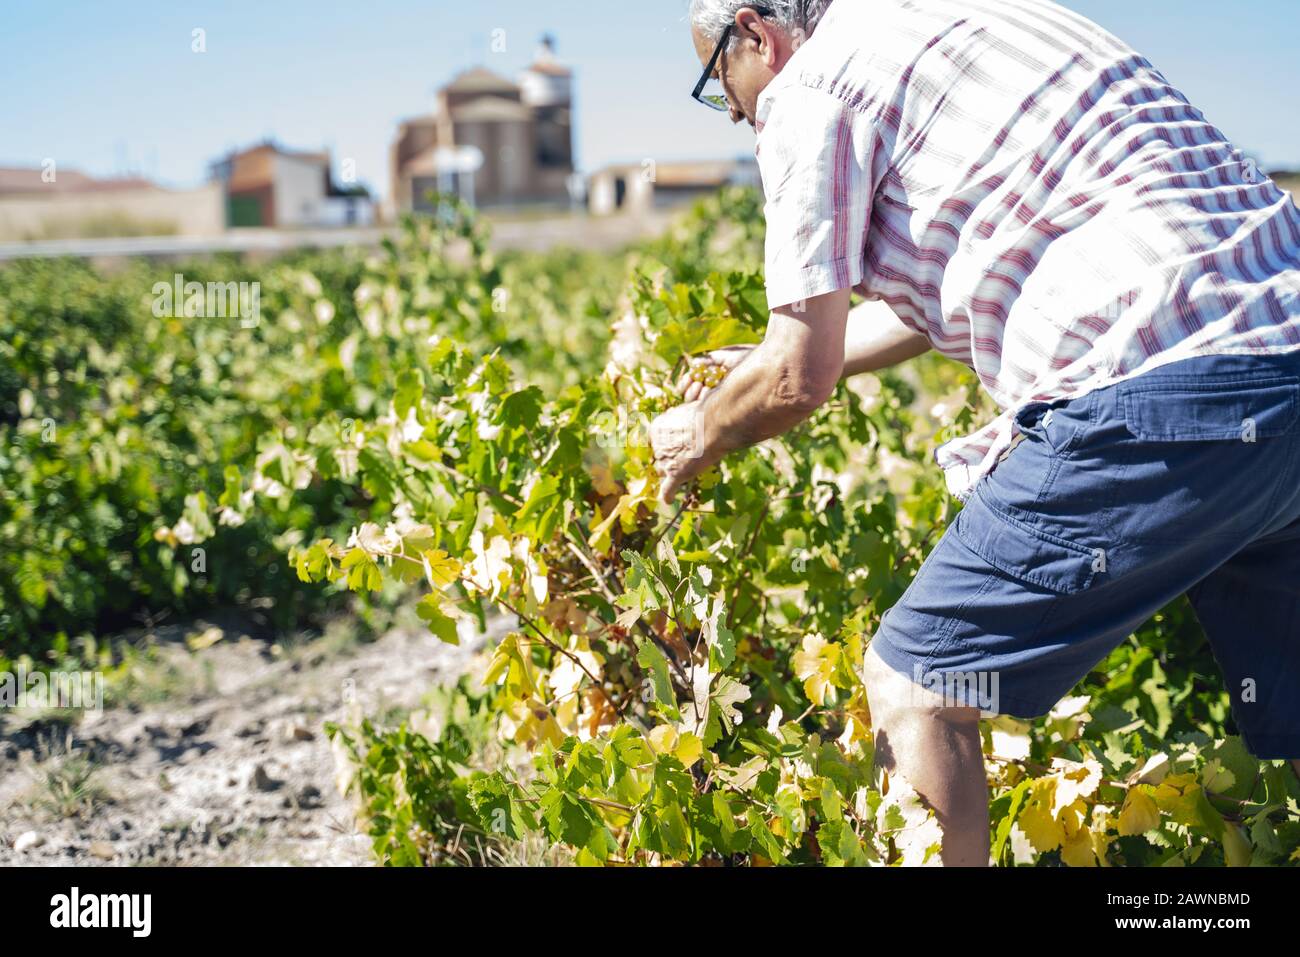 Middle-aged person picking grapes in a vineyard for making wine Stock Photo